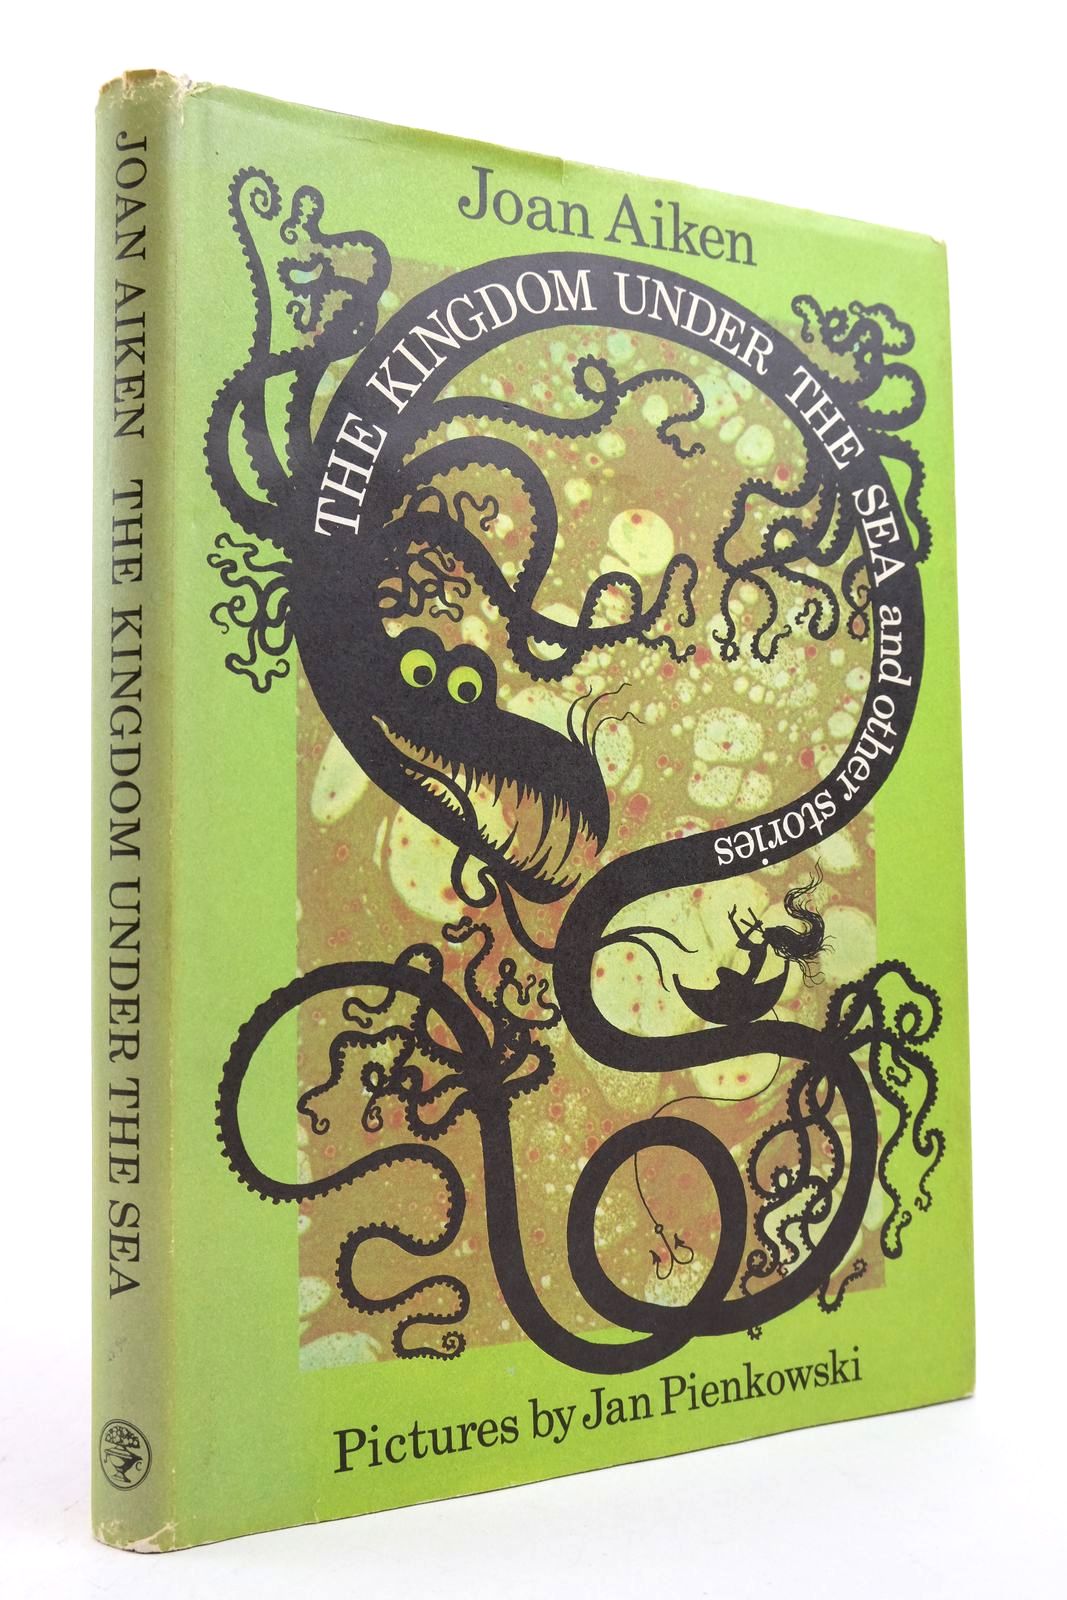 Photo of THE KINGDOM UNDER THE SEA AND OTHER STORIES written by Aiken, Joan illustrated by Pienkowski, Jan published by Jonathan Cape (STOCK CODE: 2140211)  for sale by Stella & Rose's Books